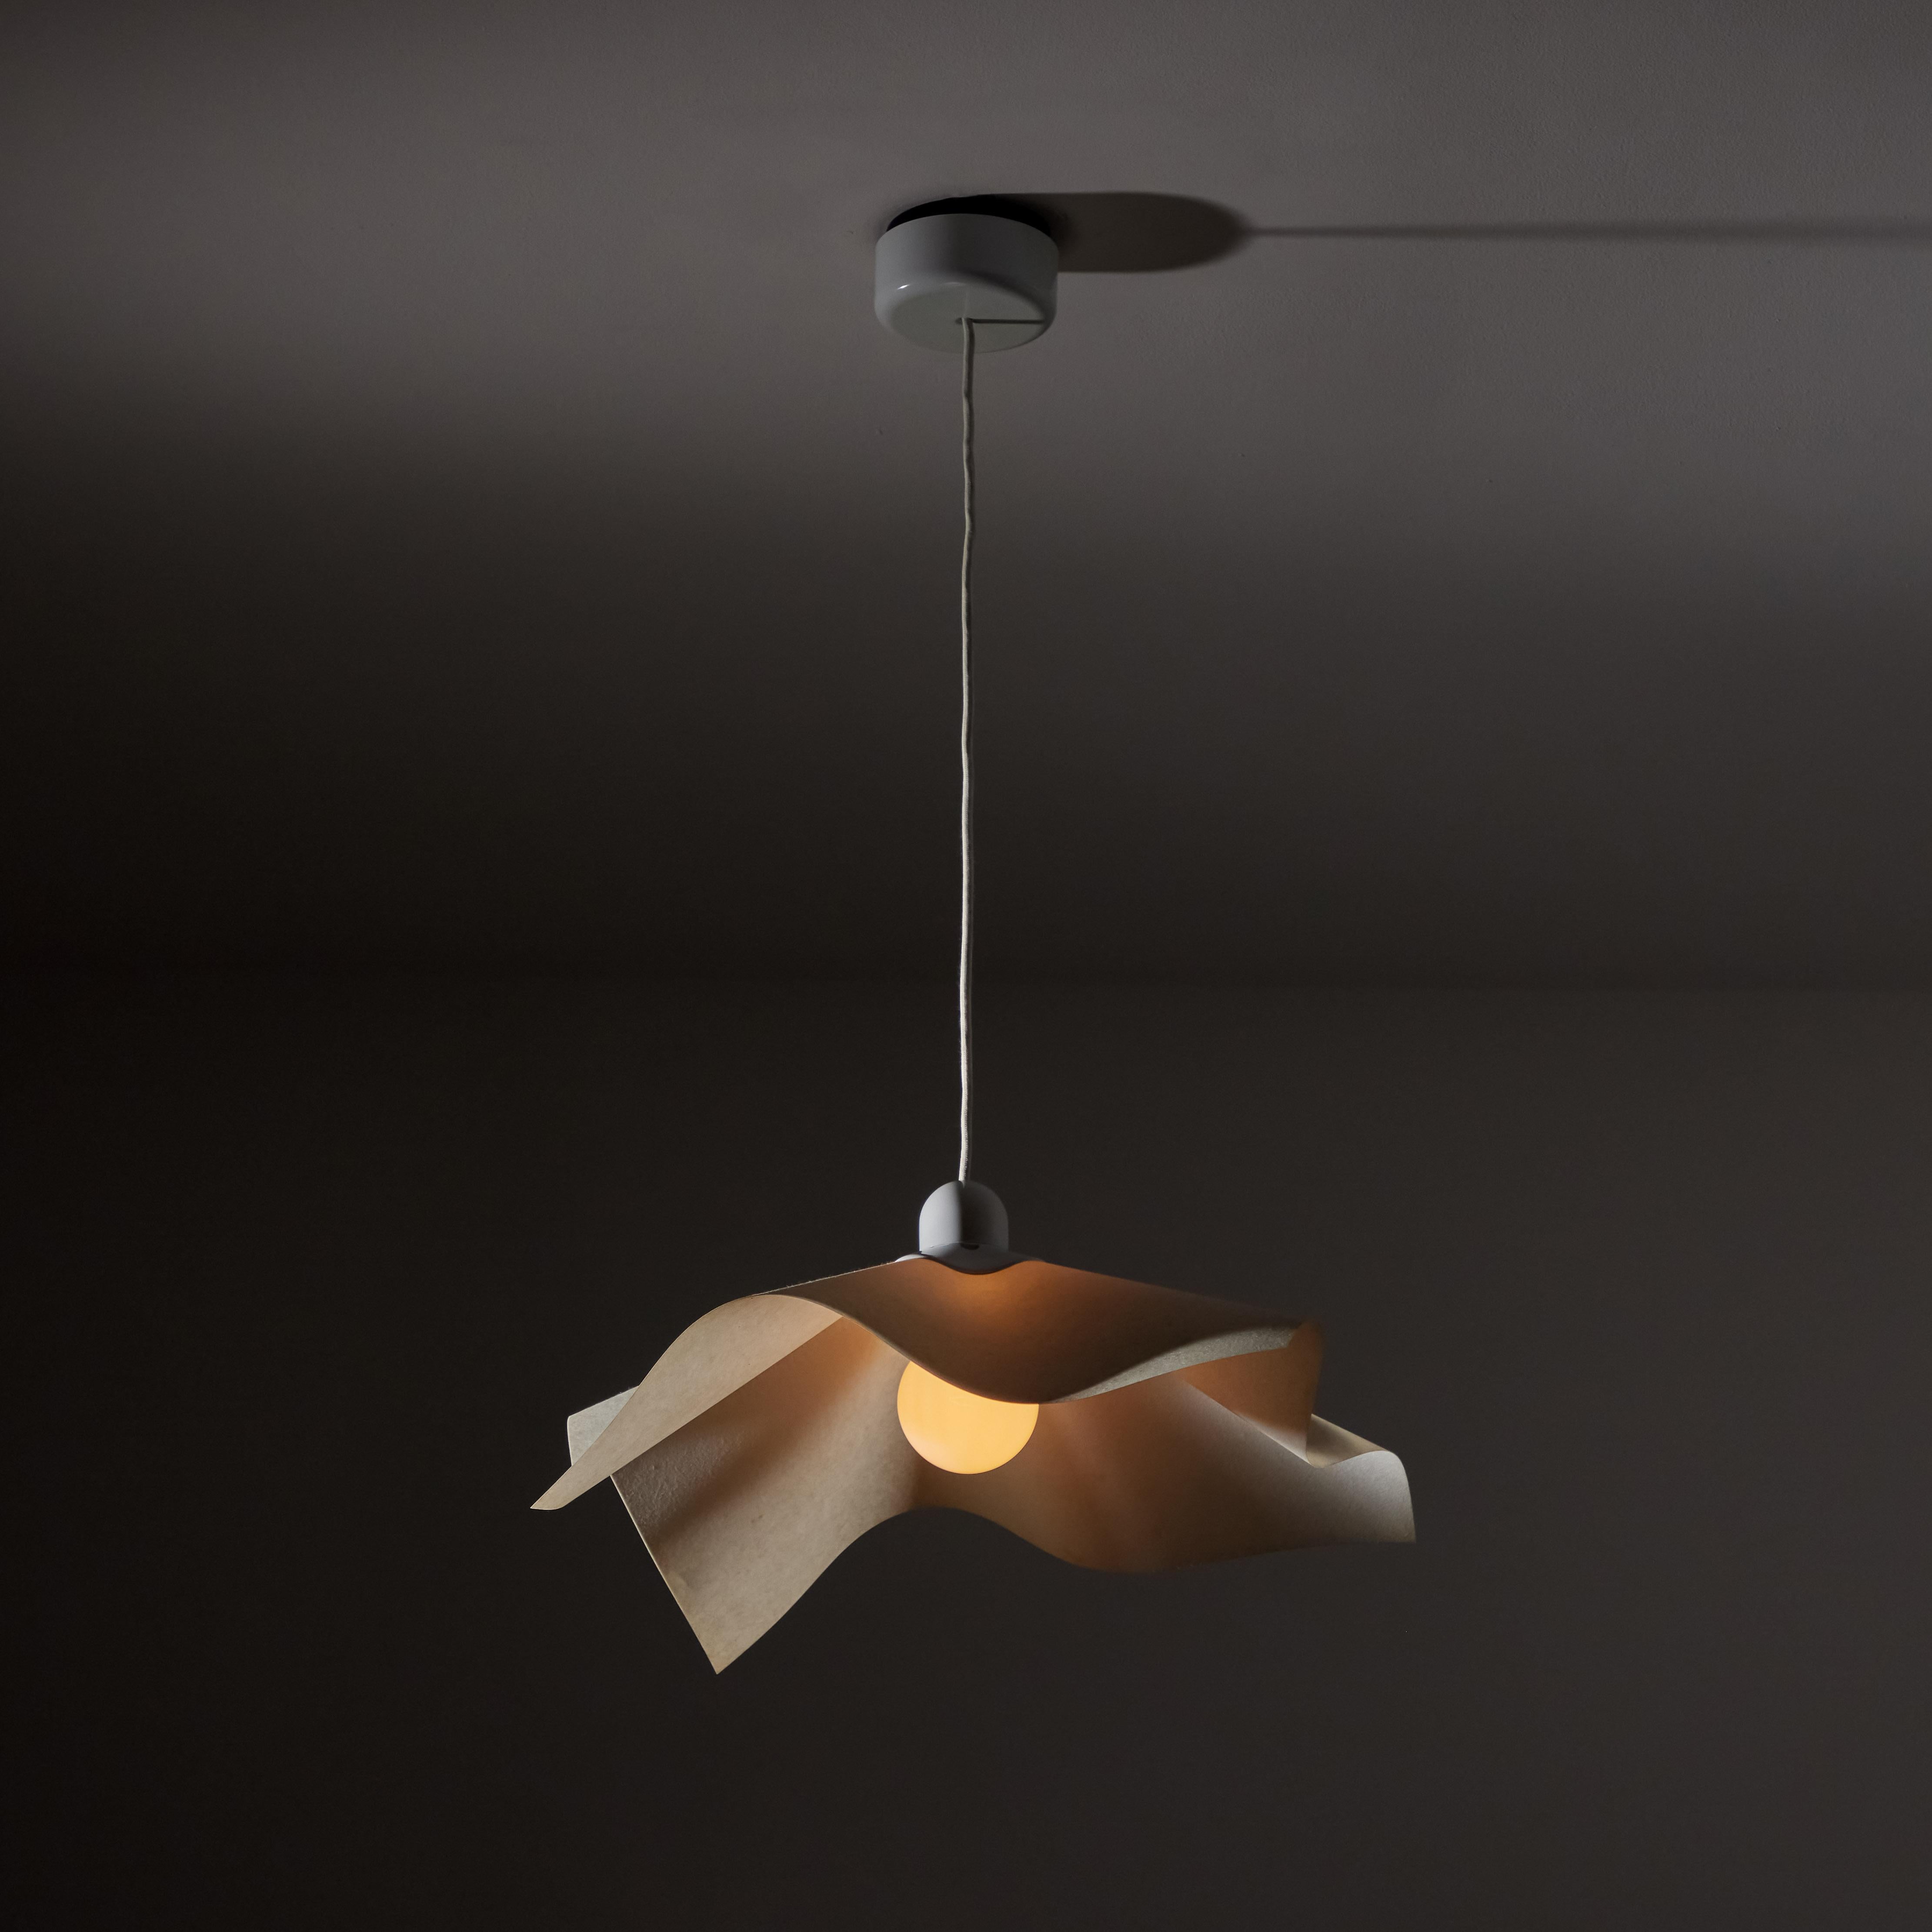 Area Curvea ceiling light by Mario Bellini & Giorgio Origlia for Artemide. Designed and manufactured in Italy, 1974. Steel, acrylic, with resin shade. Original cord, wired for U.S. standards. We recommend one E27 60w maximum bulb. Bulb not included.